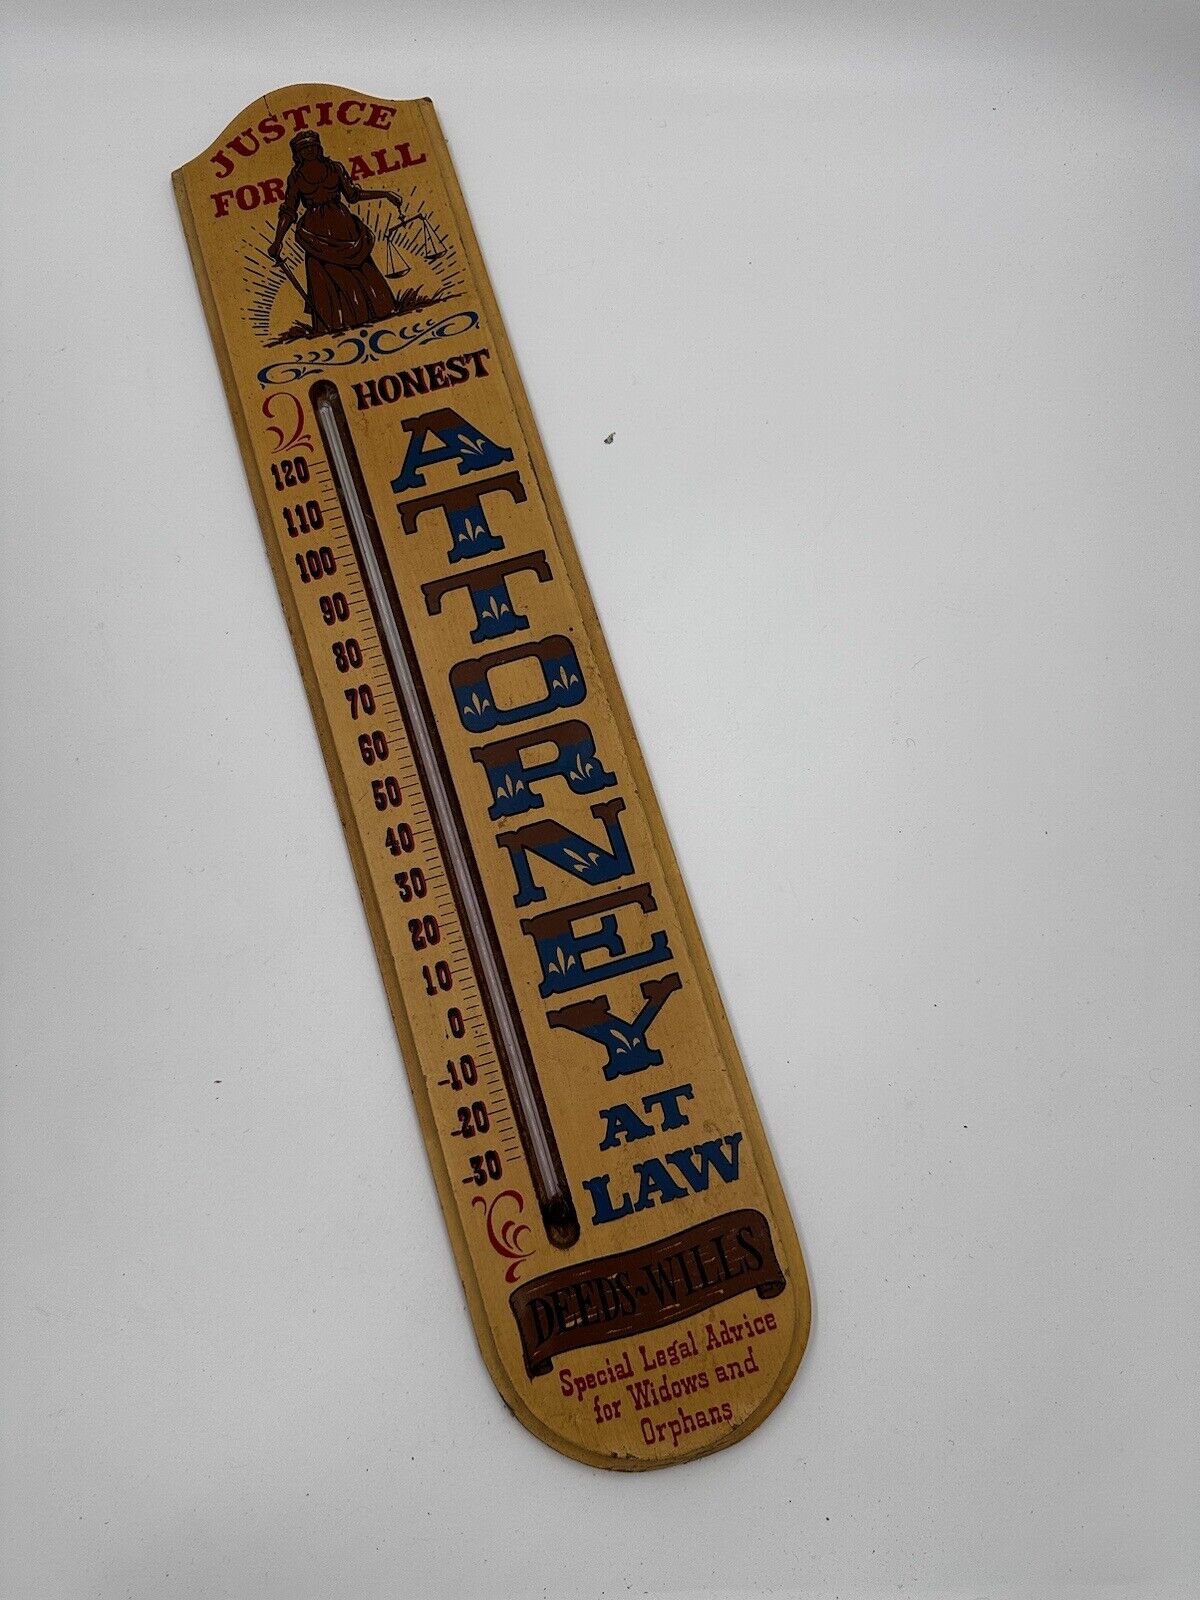 Vintage “justice For All” Thermometer Collectable Still Working